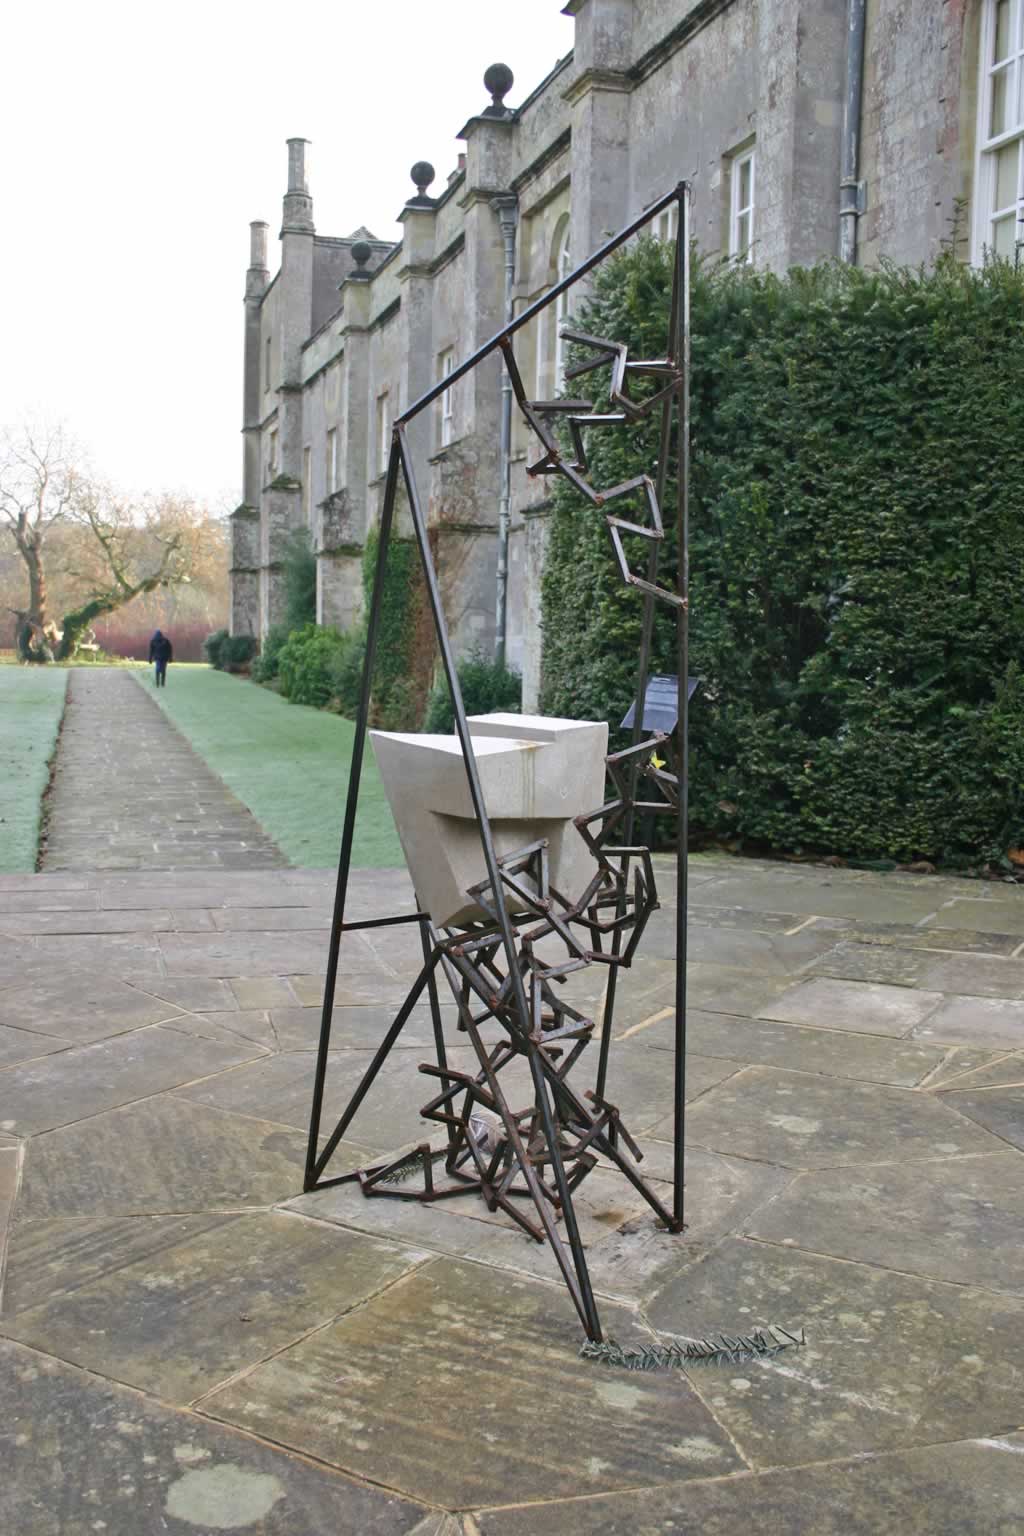 Triangulum at Mottisfont Abbey (abstract sculpture) by sculptor Ian Campbell-Briggs